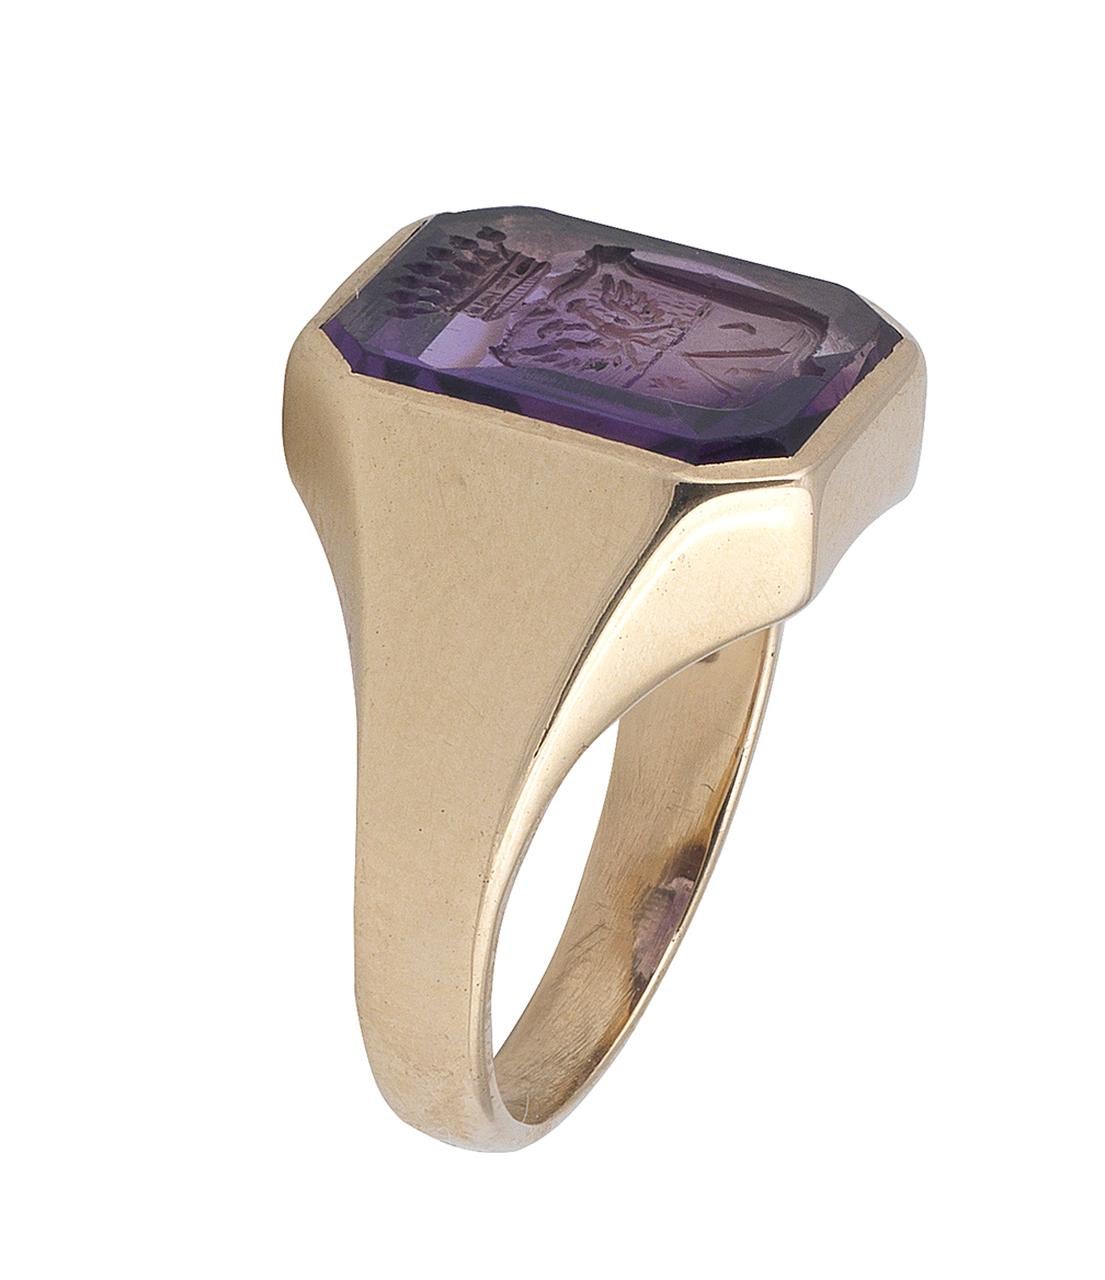 The octagonal amethyst seal, carved to depict a double-headed eagle over a pyramid, beneath a Count  crown, of the Counts Caramelli of Lombardy. Ring size 6. Weight 6.8gms. 